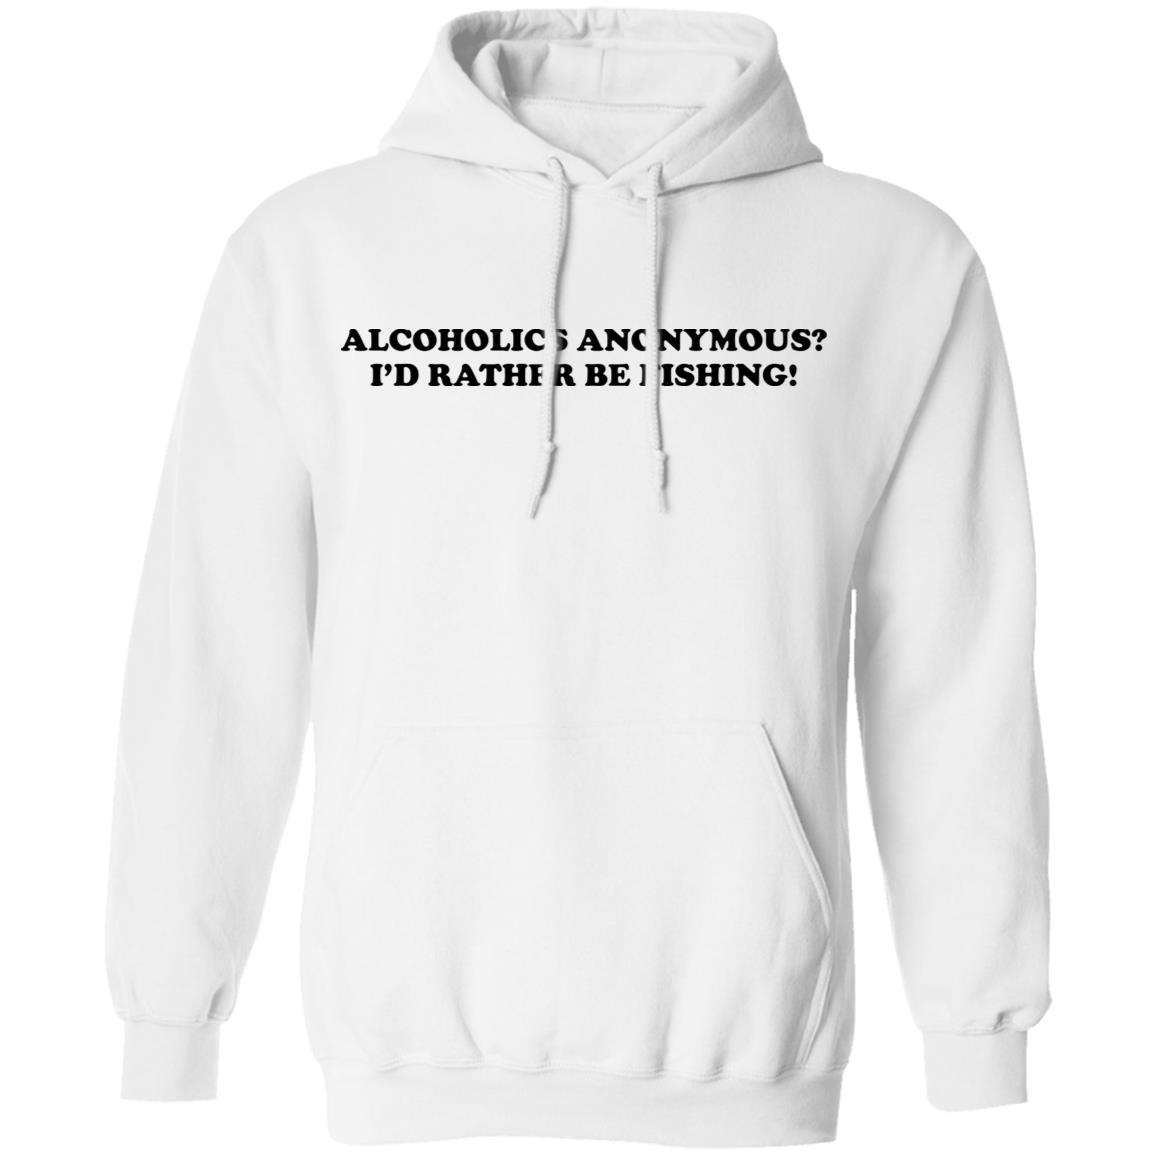 I'd Rather Be Fly Fishing! Novelty Hoodies (No-Zip/Pullover